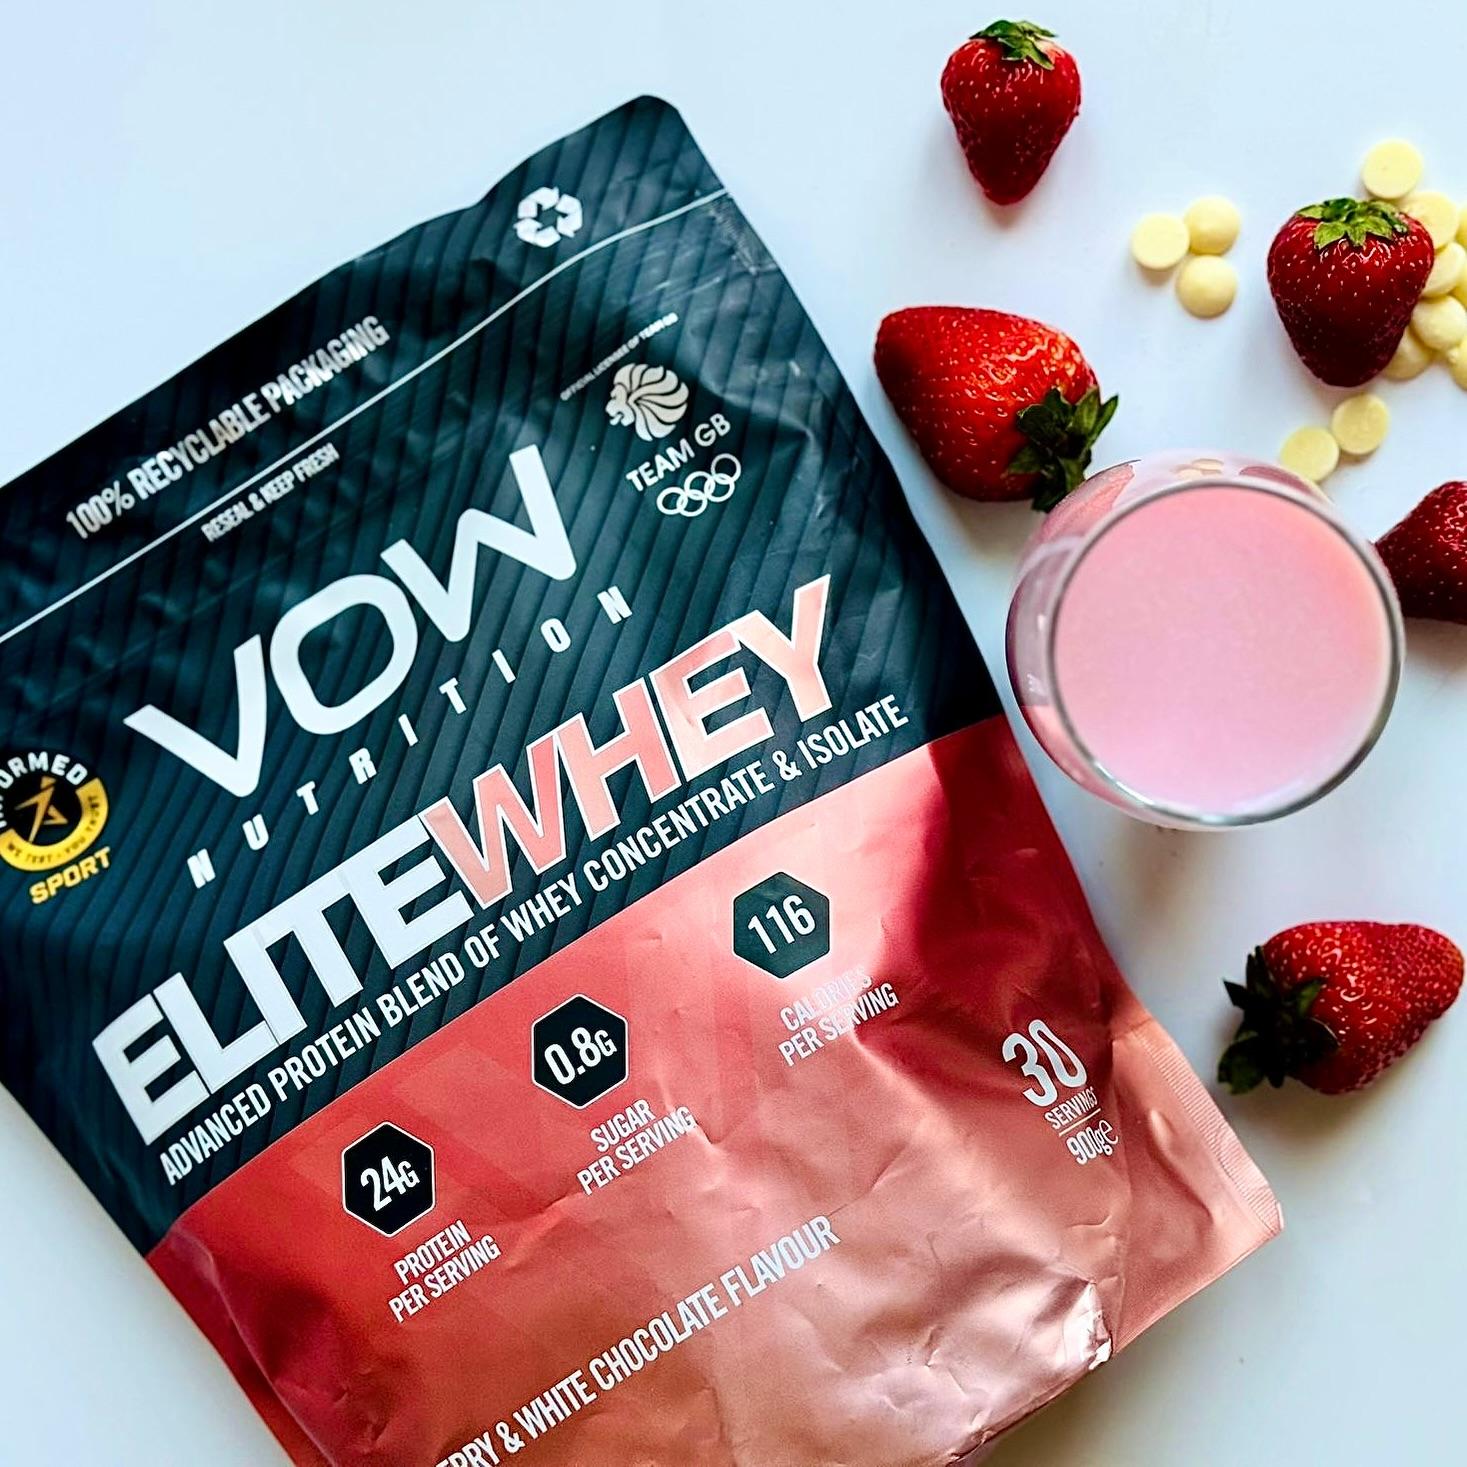 15% Student Discount at Vow Nutrition